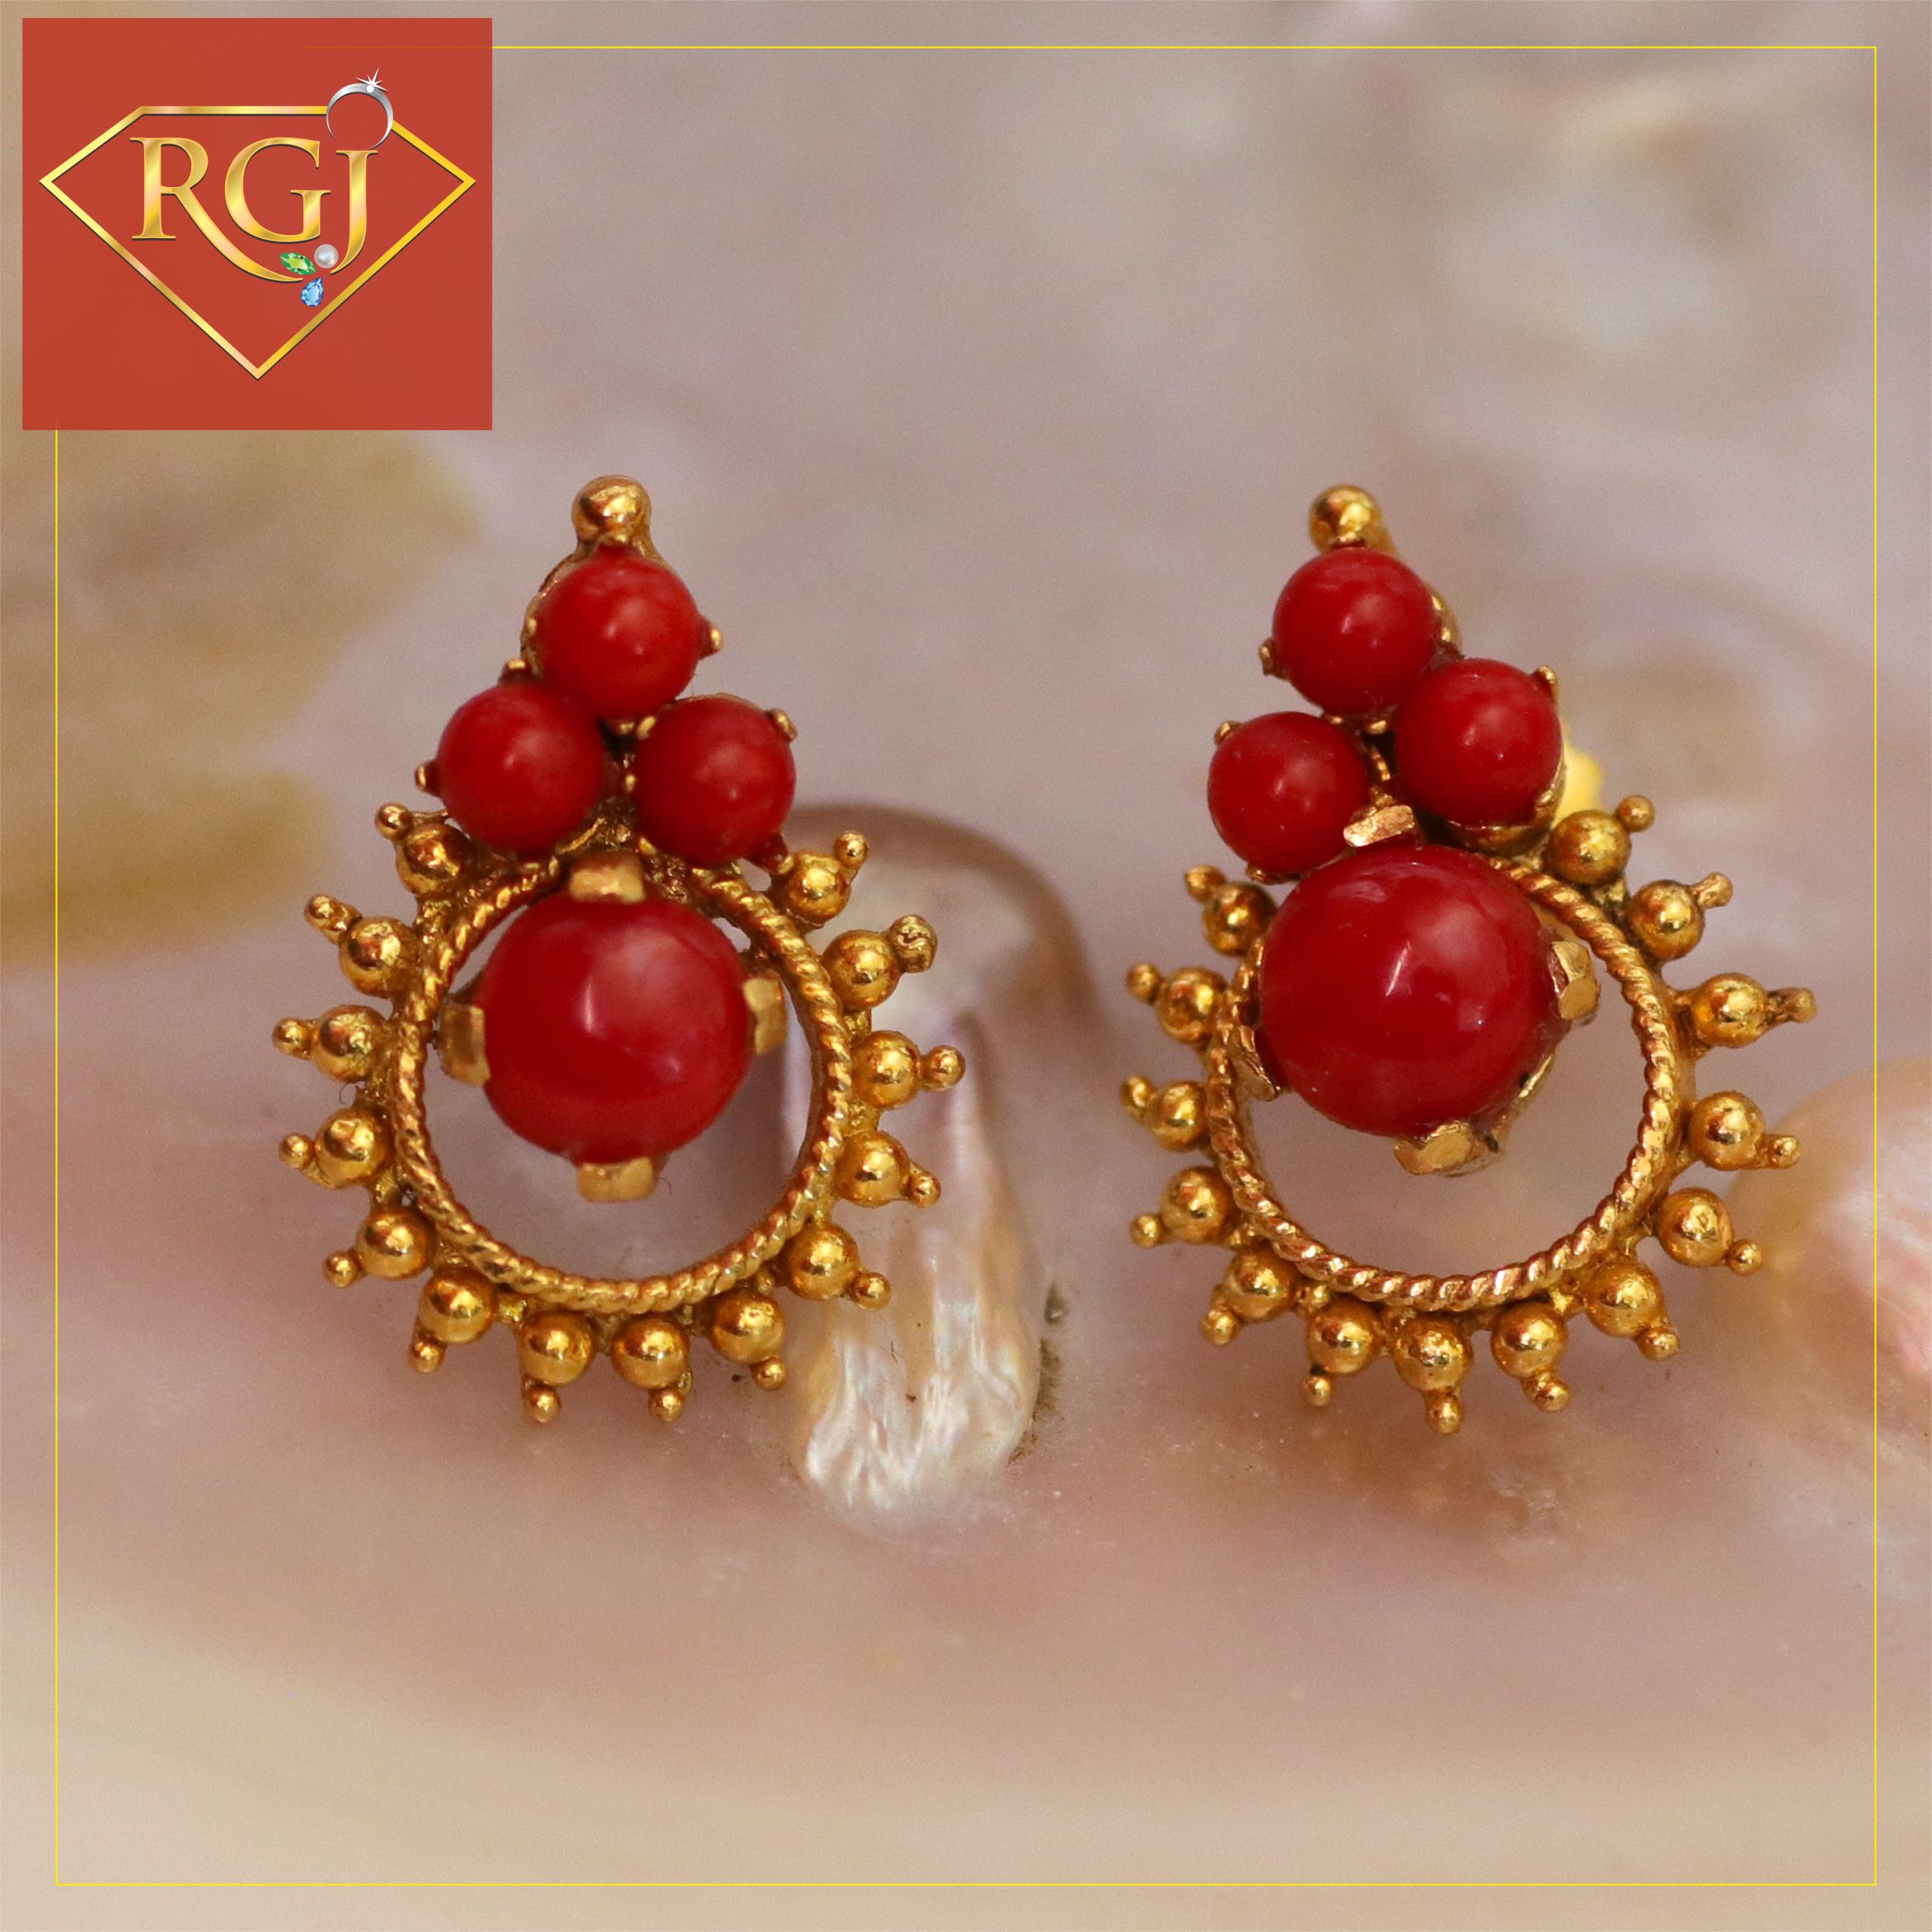 Buy Solid Gold Jewelry Coral Earrings Handmade Birthstone Jewelry 9k 14k  18k 22k Gold Gift for Her Online in India - Etsy